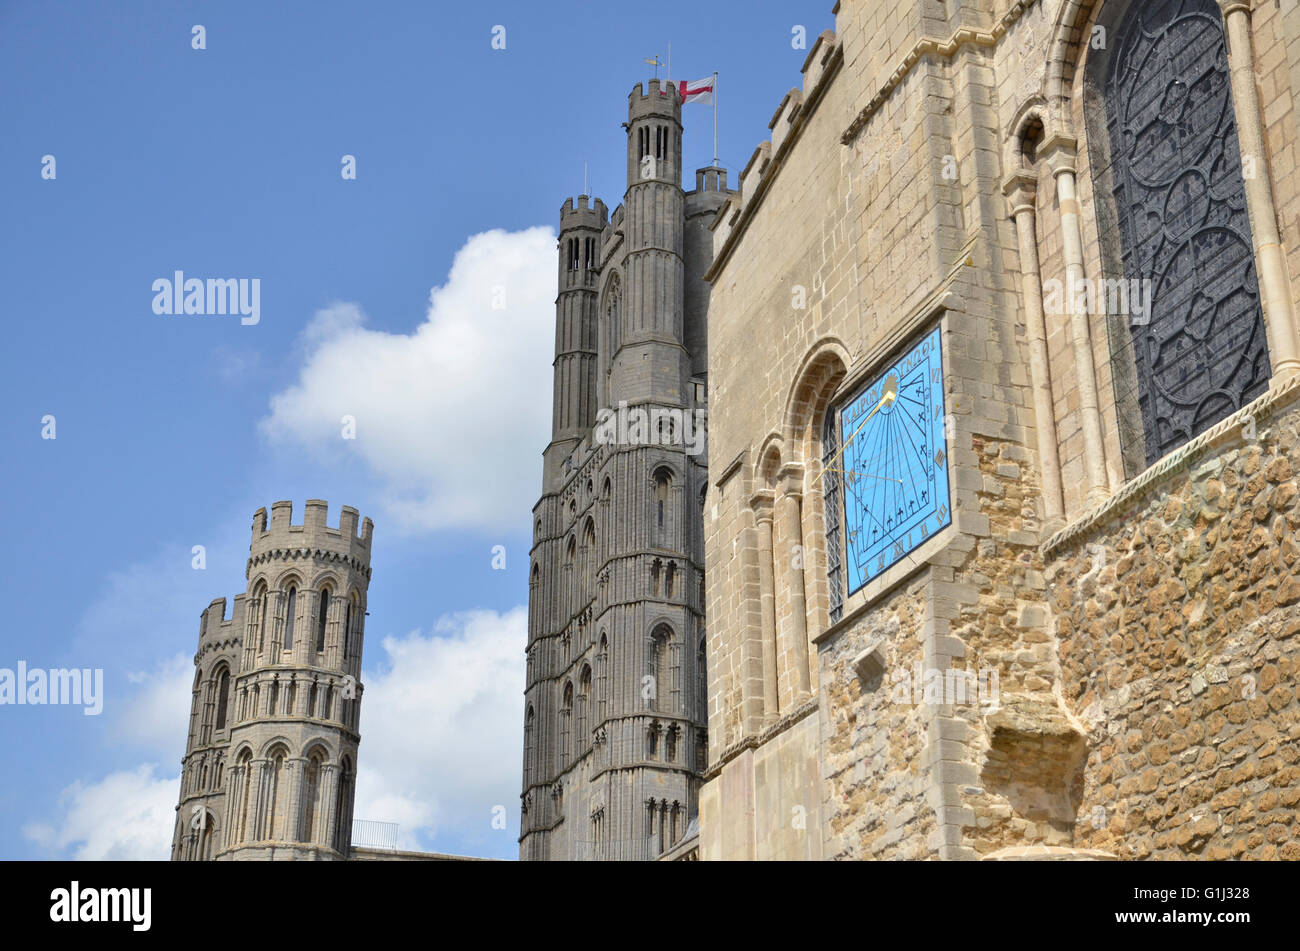 Cattedrale di Ely a Ely, Cambridgeshire, Inghilterra Foto Stock